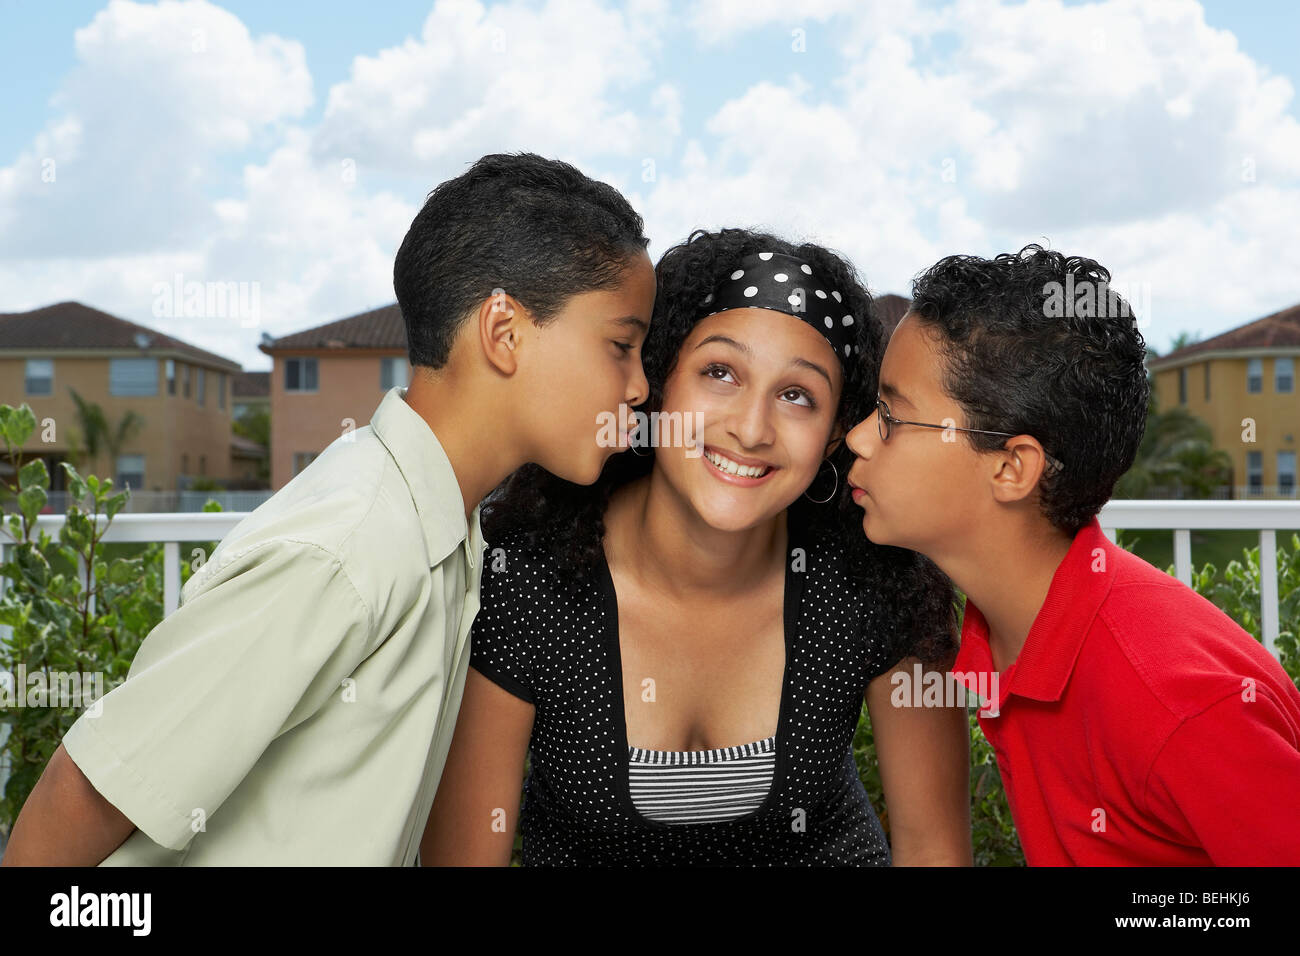 Side profile of two boys kissing a teenage girl Stock Photo